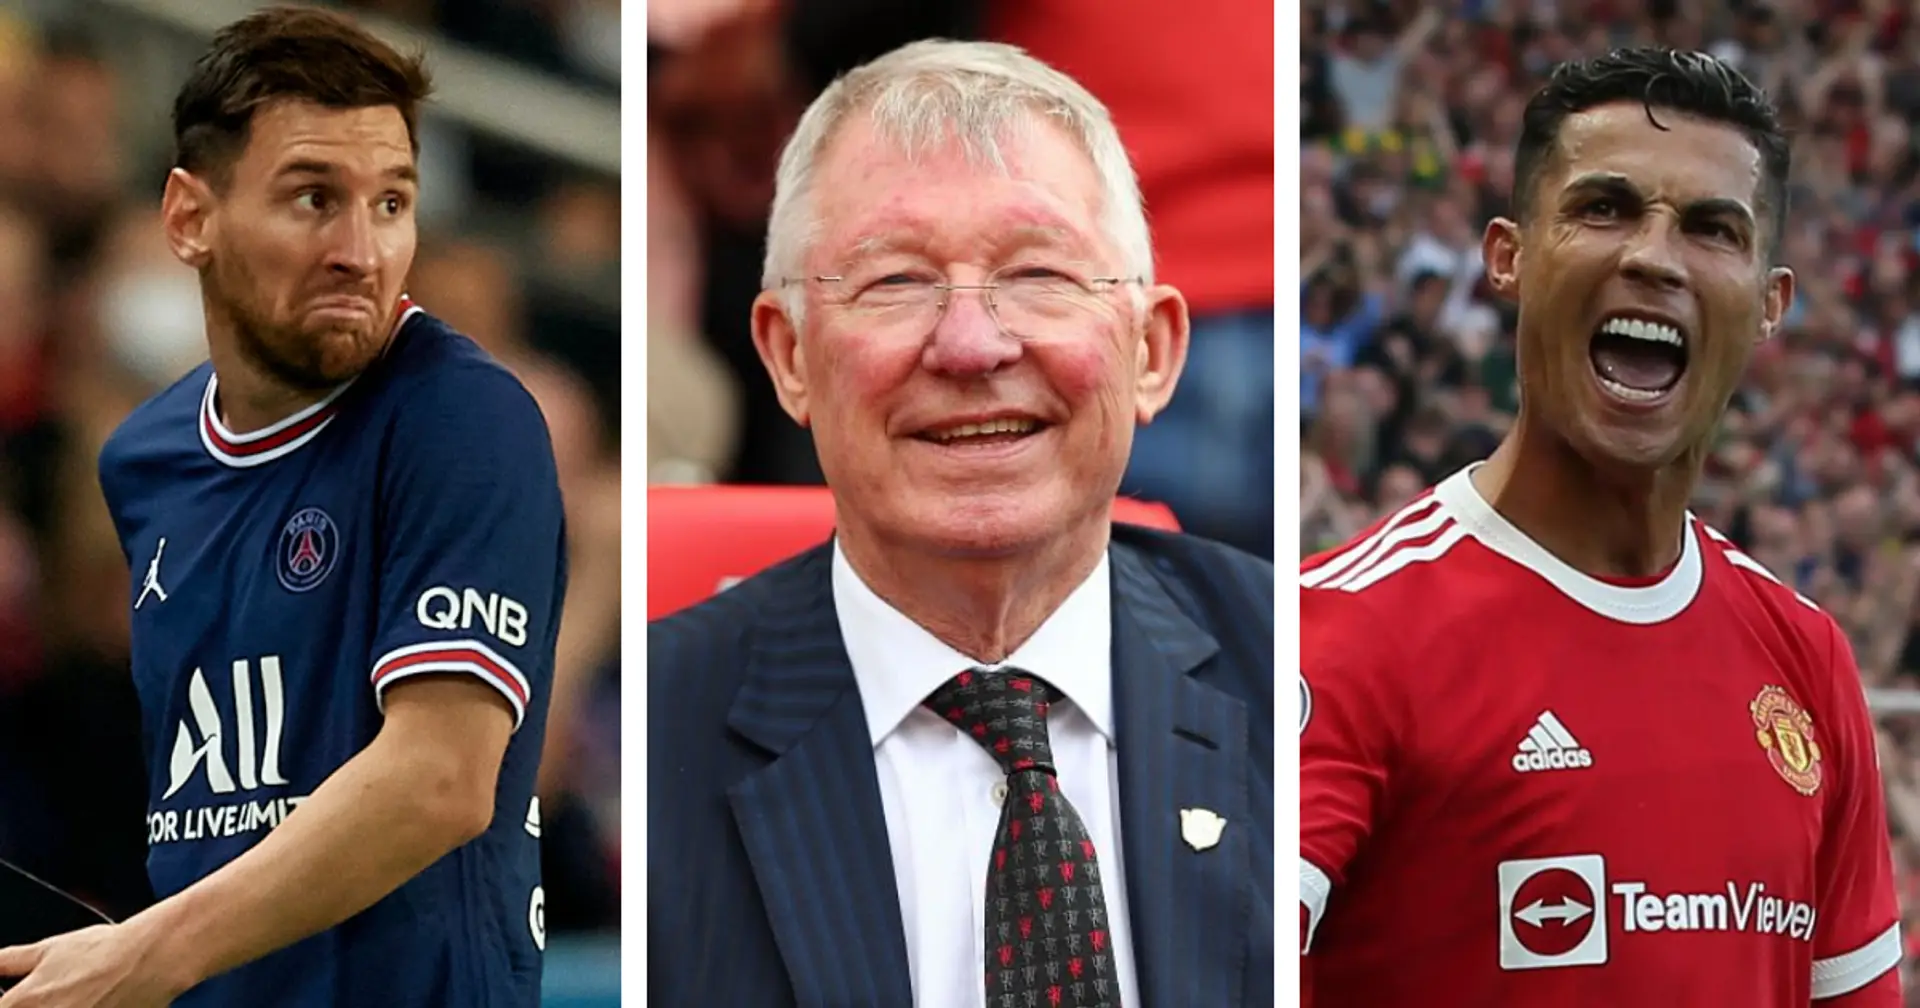 'Ronaldo could play for Millwall or QPR': Sir Alex's comments resurface after Messi's abysmal start at PSG